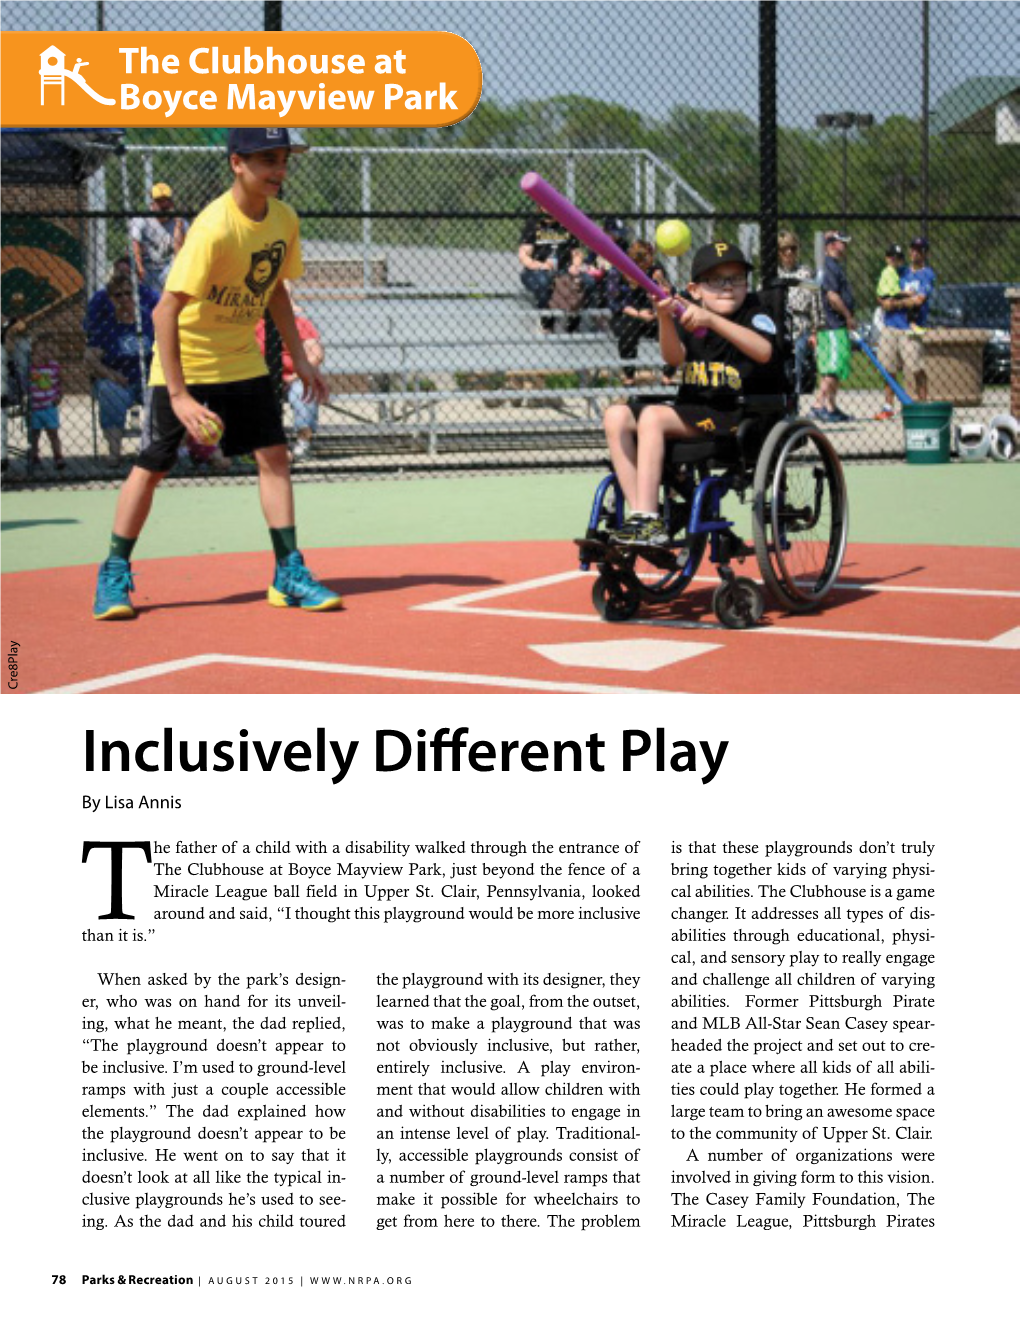 Inclusively Different Play by Lisa Annis